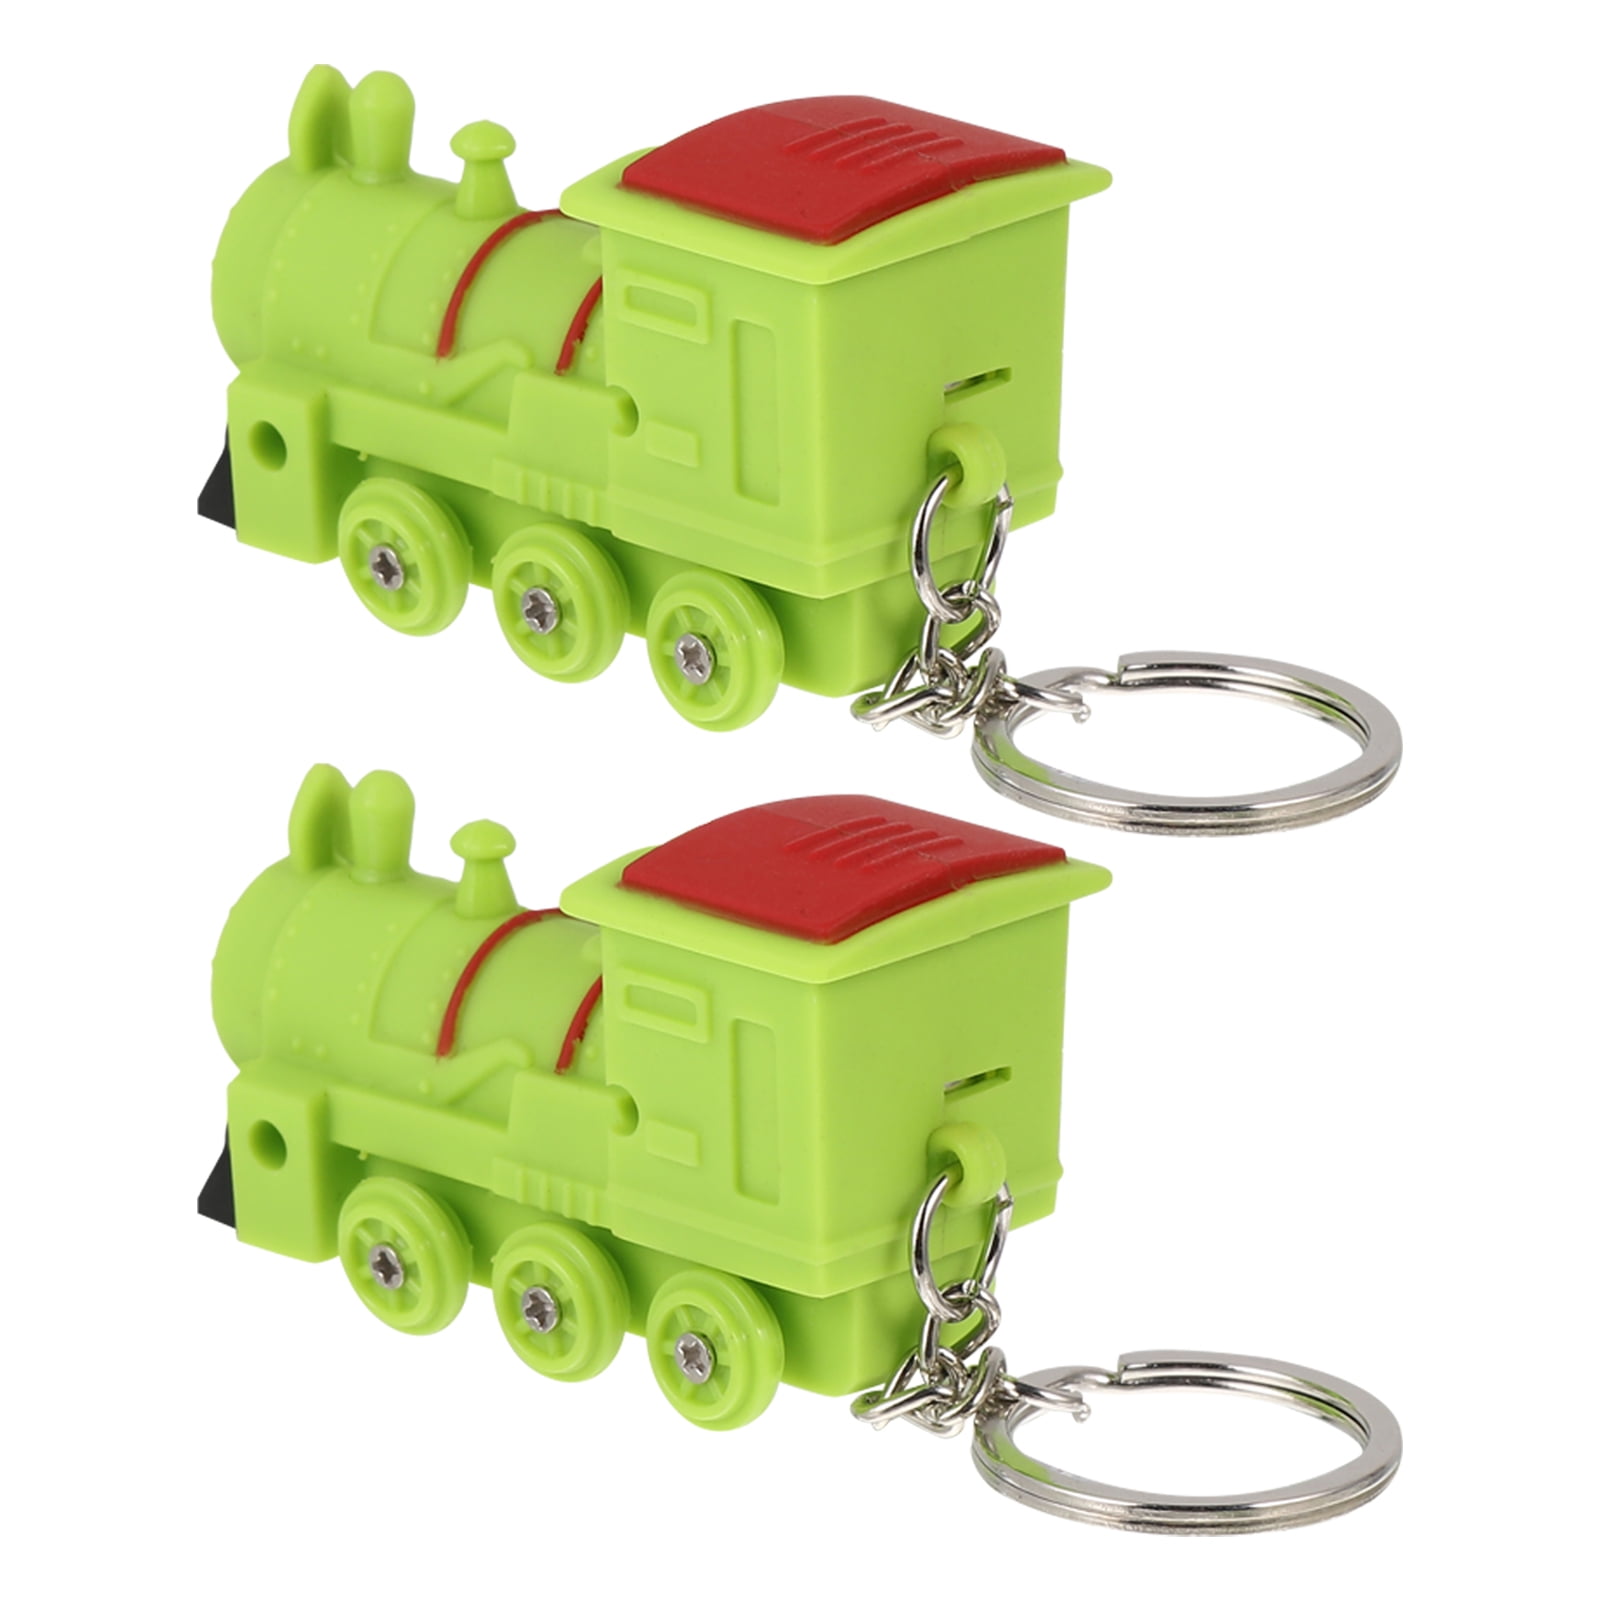 Livoty Cute Train Keychain with LED Light and Sound Keyfob Kids Toy Key Ring Gift 